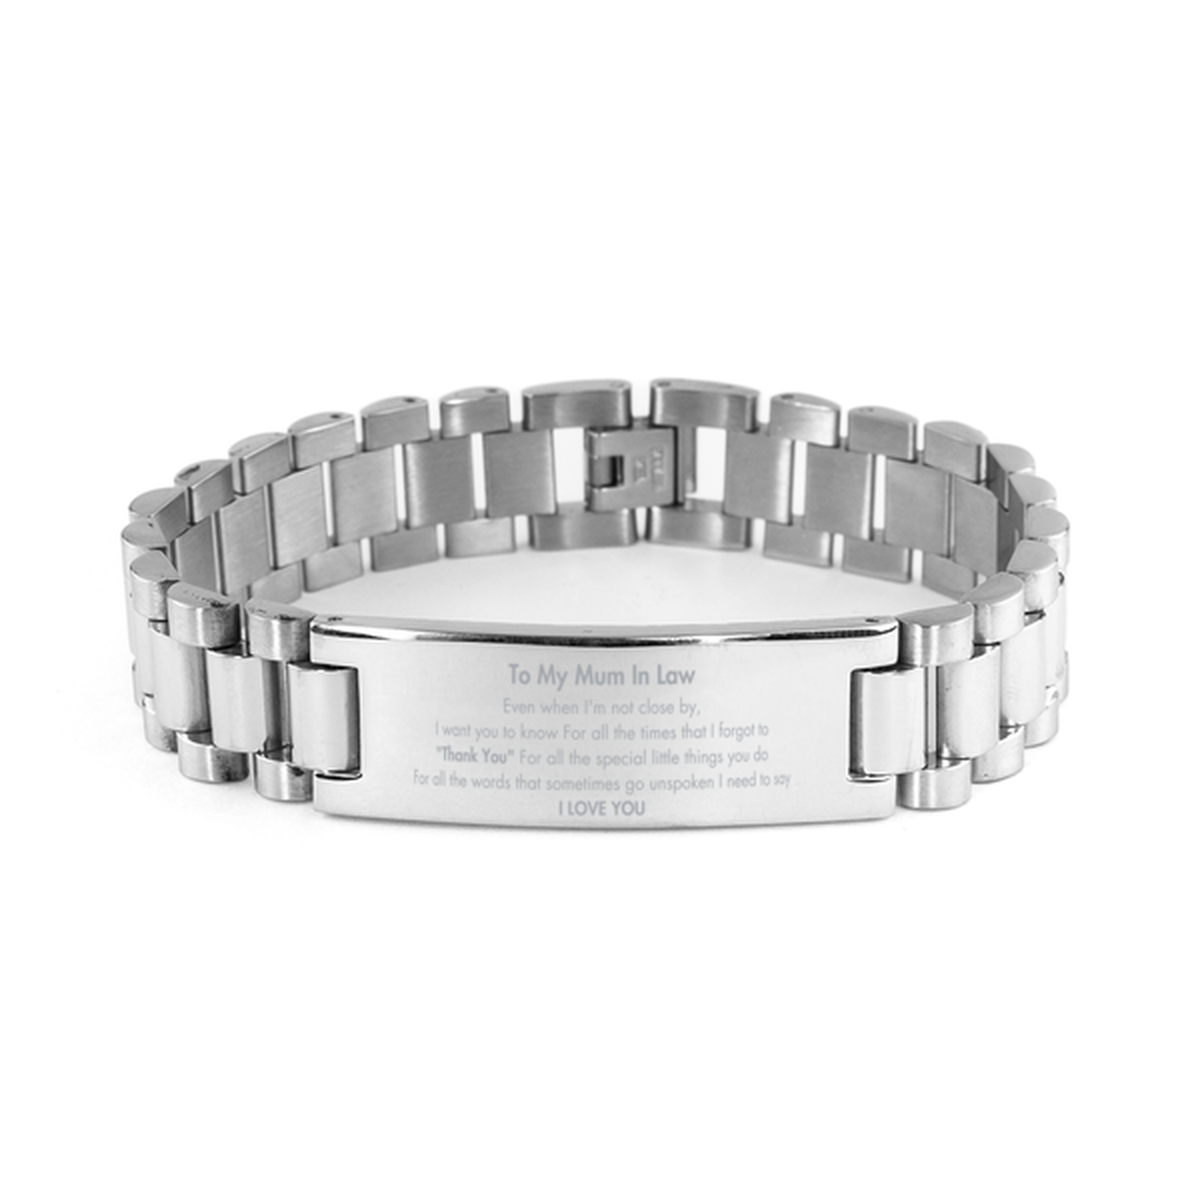 Thank You Gifts for Mum In Law , Keepsake Ladder Stainless Steel Bracelet Gifts for Mum In Law  Birthday Mother's day Father's Day Mum In Law  For all the words That sometimes go unspoken I need to say I LOVE YOU